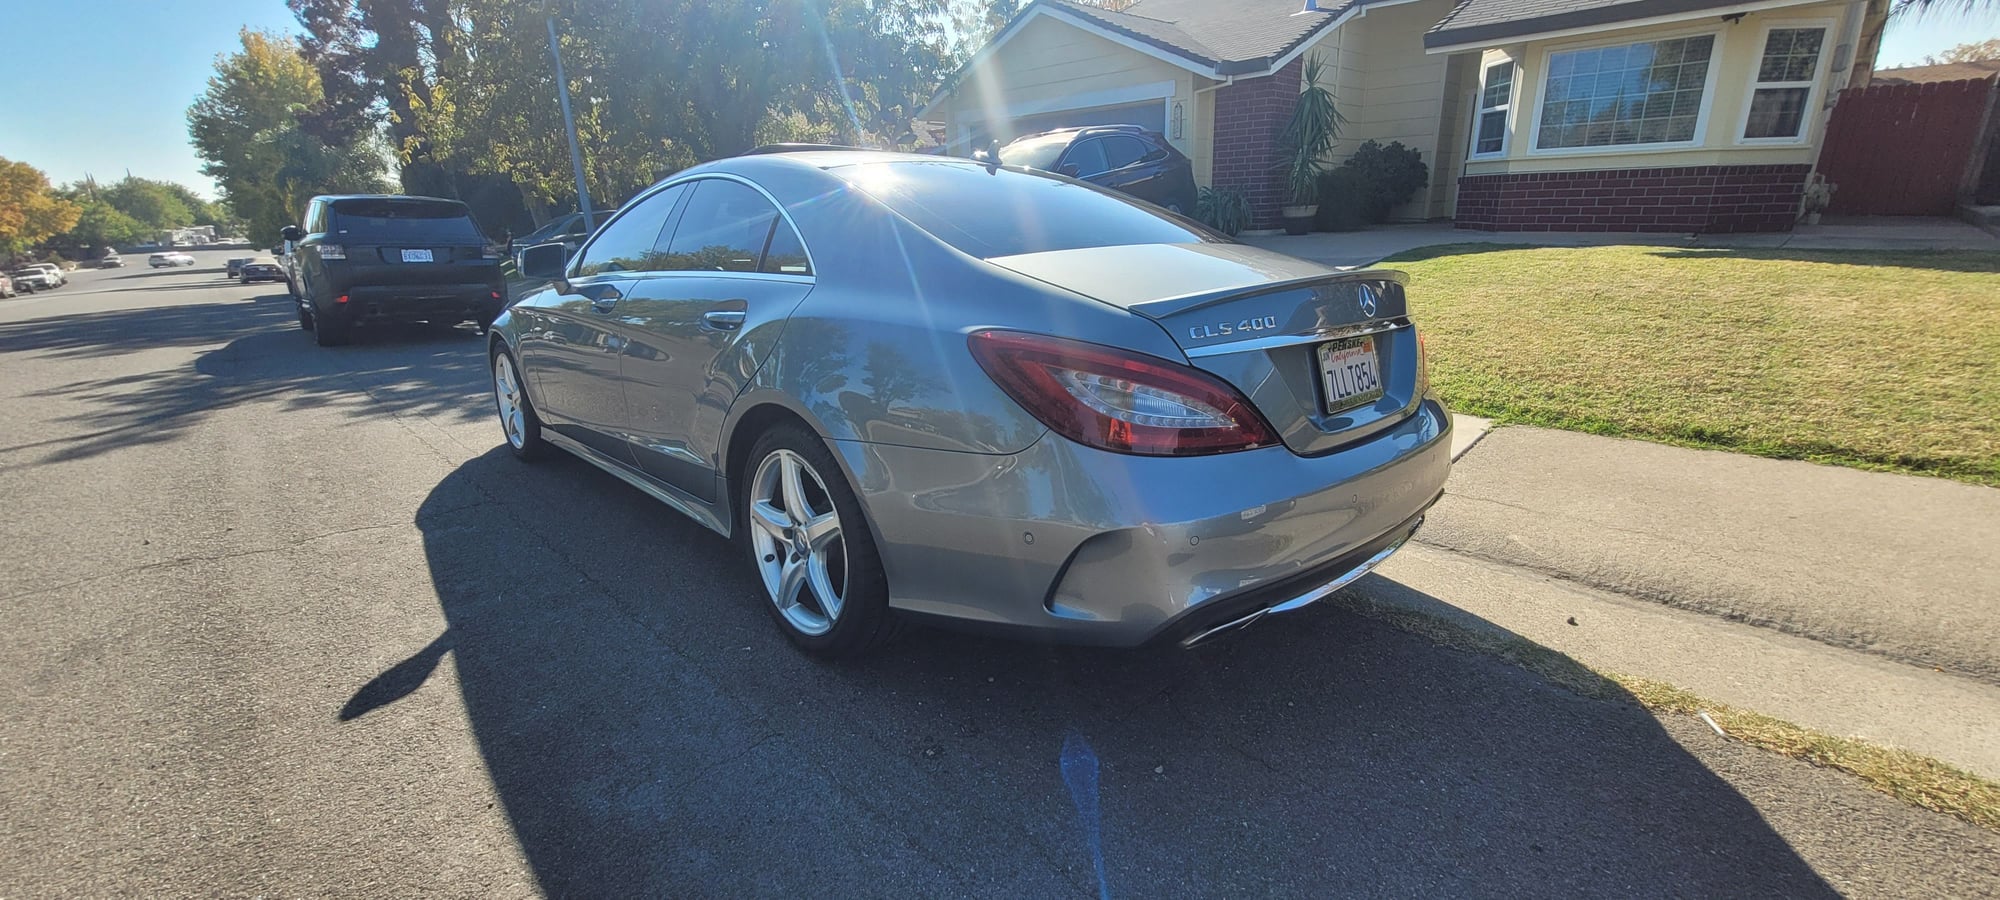 2015 Mercedes-Benz CLS400 - 2015 CLS400 for sale - Used - VIN WDDLJ6FB0FA155503 - 74,000 Miles - 6 cyl - 2WD - Automatic - Sedan - Gray - Carmichael, CA 95608, United States